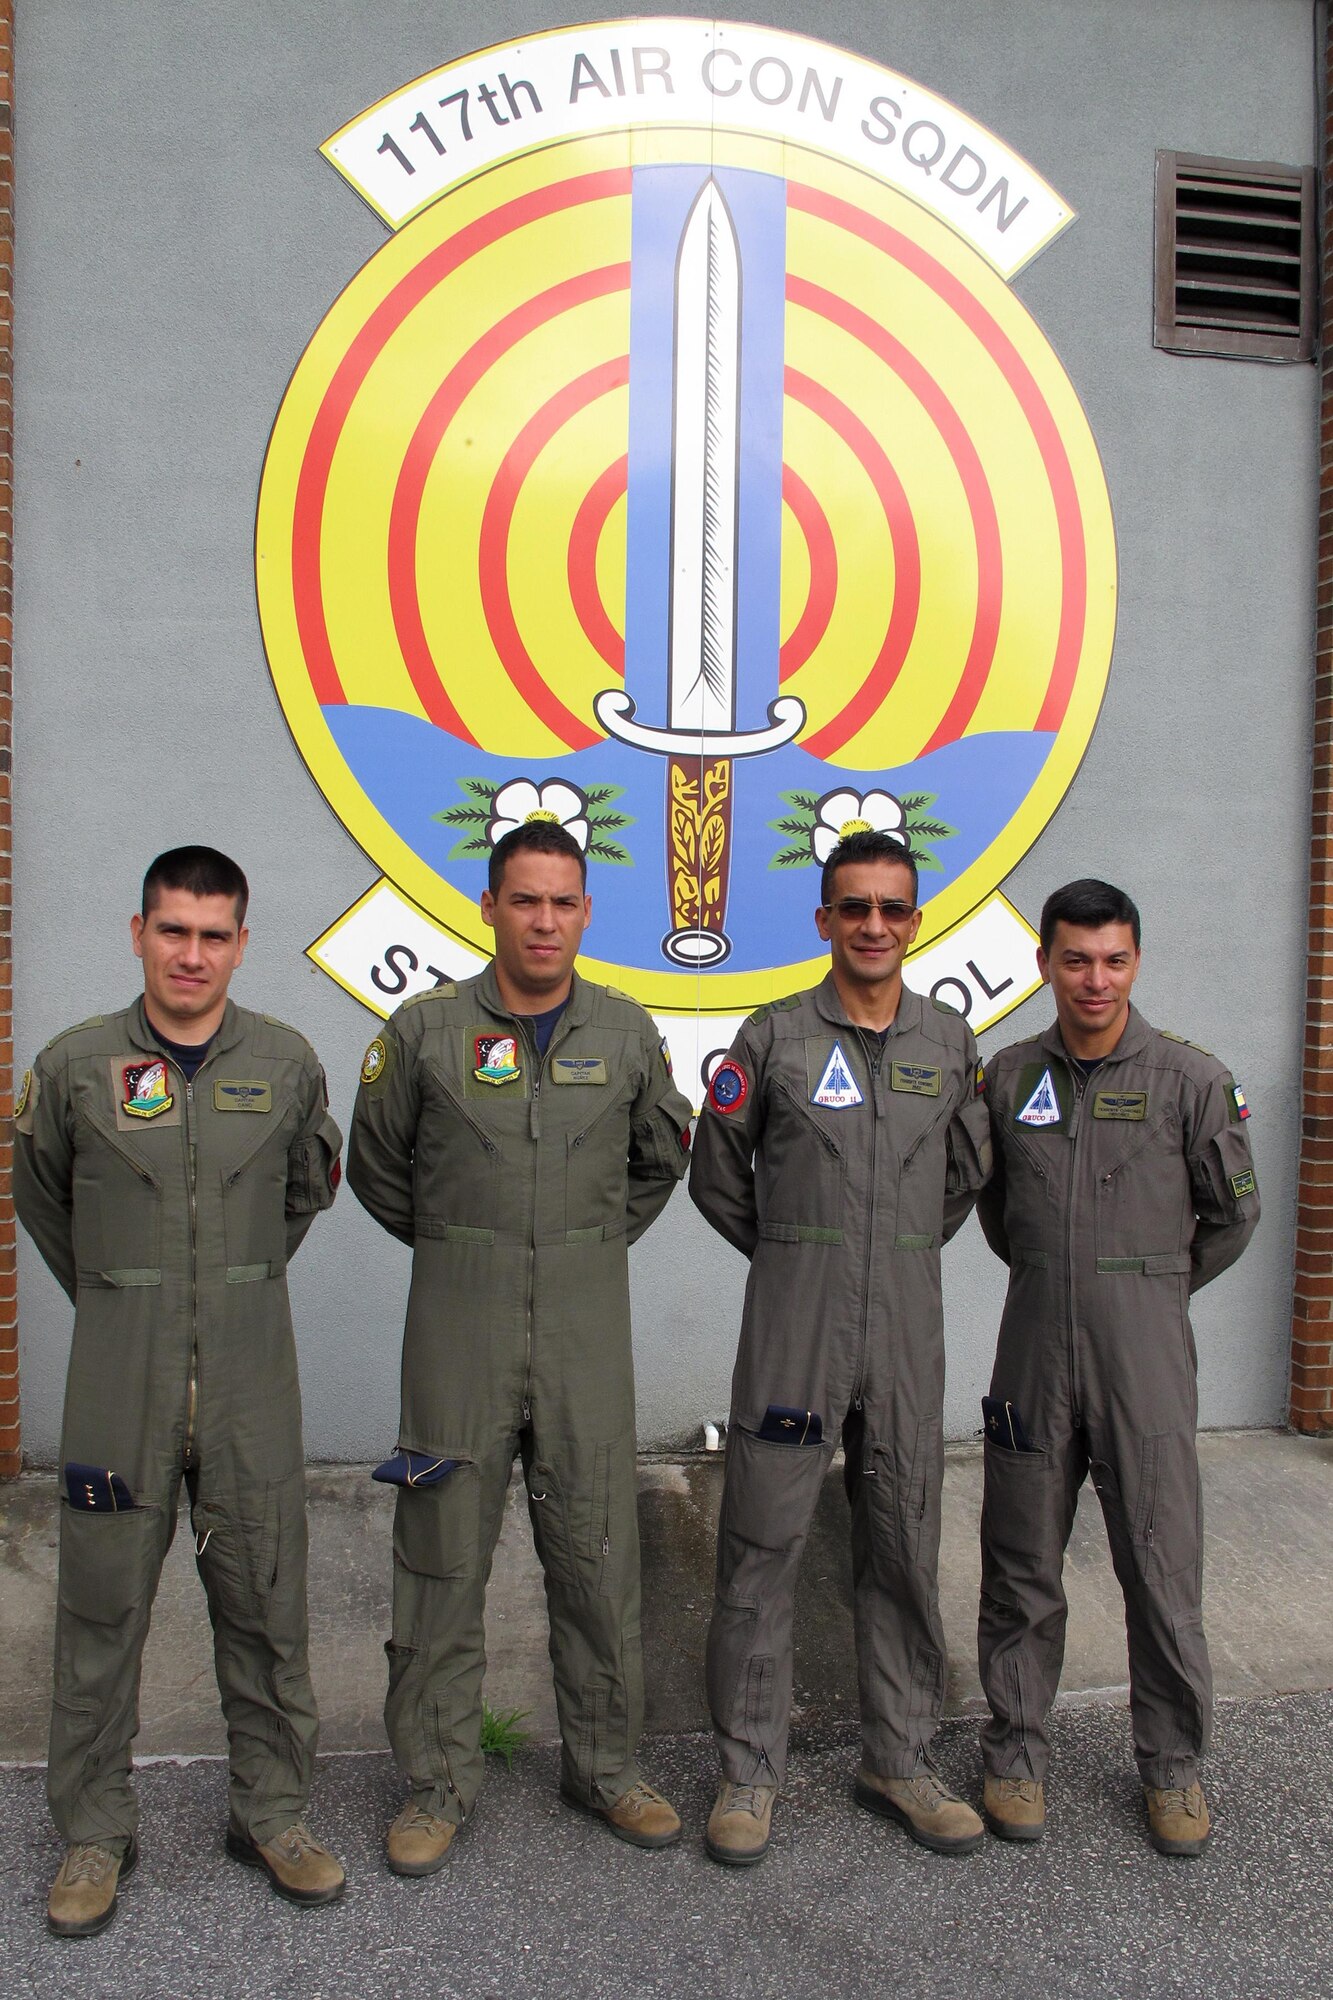 Four Colombian Air Force officers attend a State Partnership Program Subject Matter Expert Exchange on Ground Control Intercept with the Georgia Air National Guard’s 117th Air Control Squadron at Hunter Army Airfield in Savannah, Georgia, May 30-June 2, 2017. During the weeklong engagement the Colombians worked with Air Controllers from 117th shaping Colombian Air Force’s training plans by pairing experts together to exchange ideas. The Georgia Air National Guard supported the South Carolina National Guard’s State Partnership Program during the engagement.   (U.S. Air National Guard photo by Capt. Stephen D. Hudson)